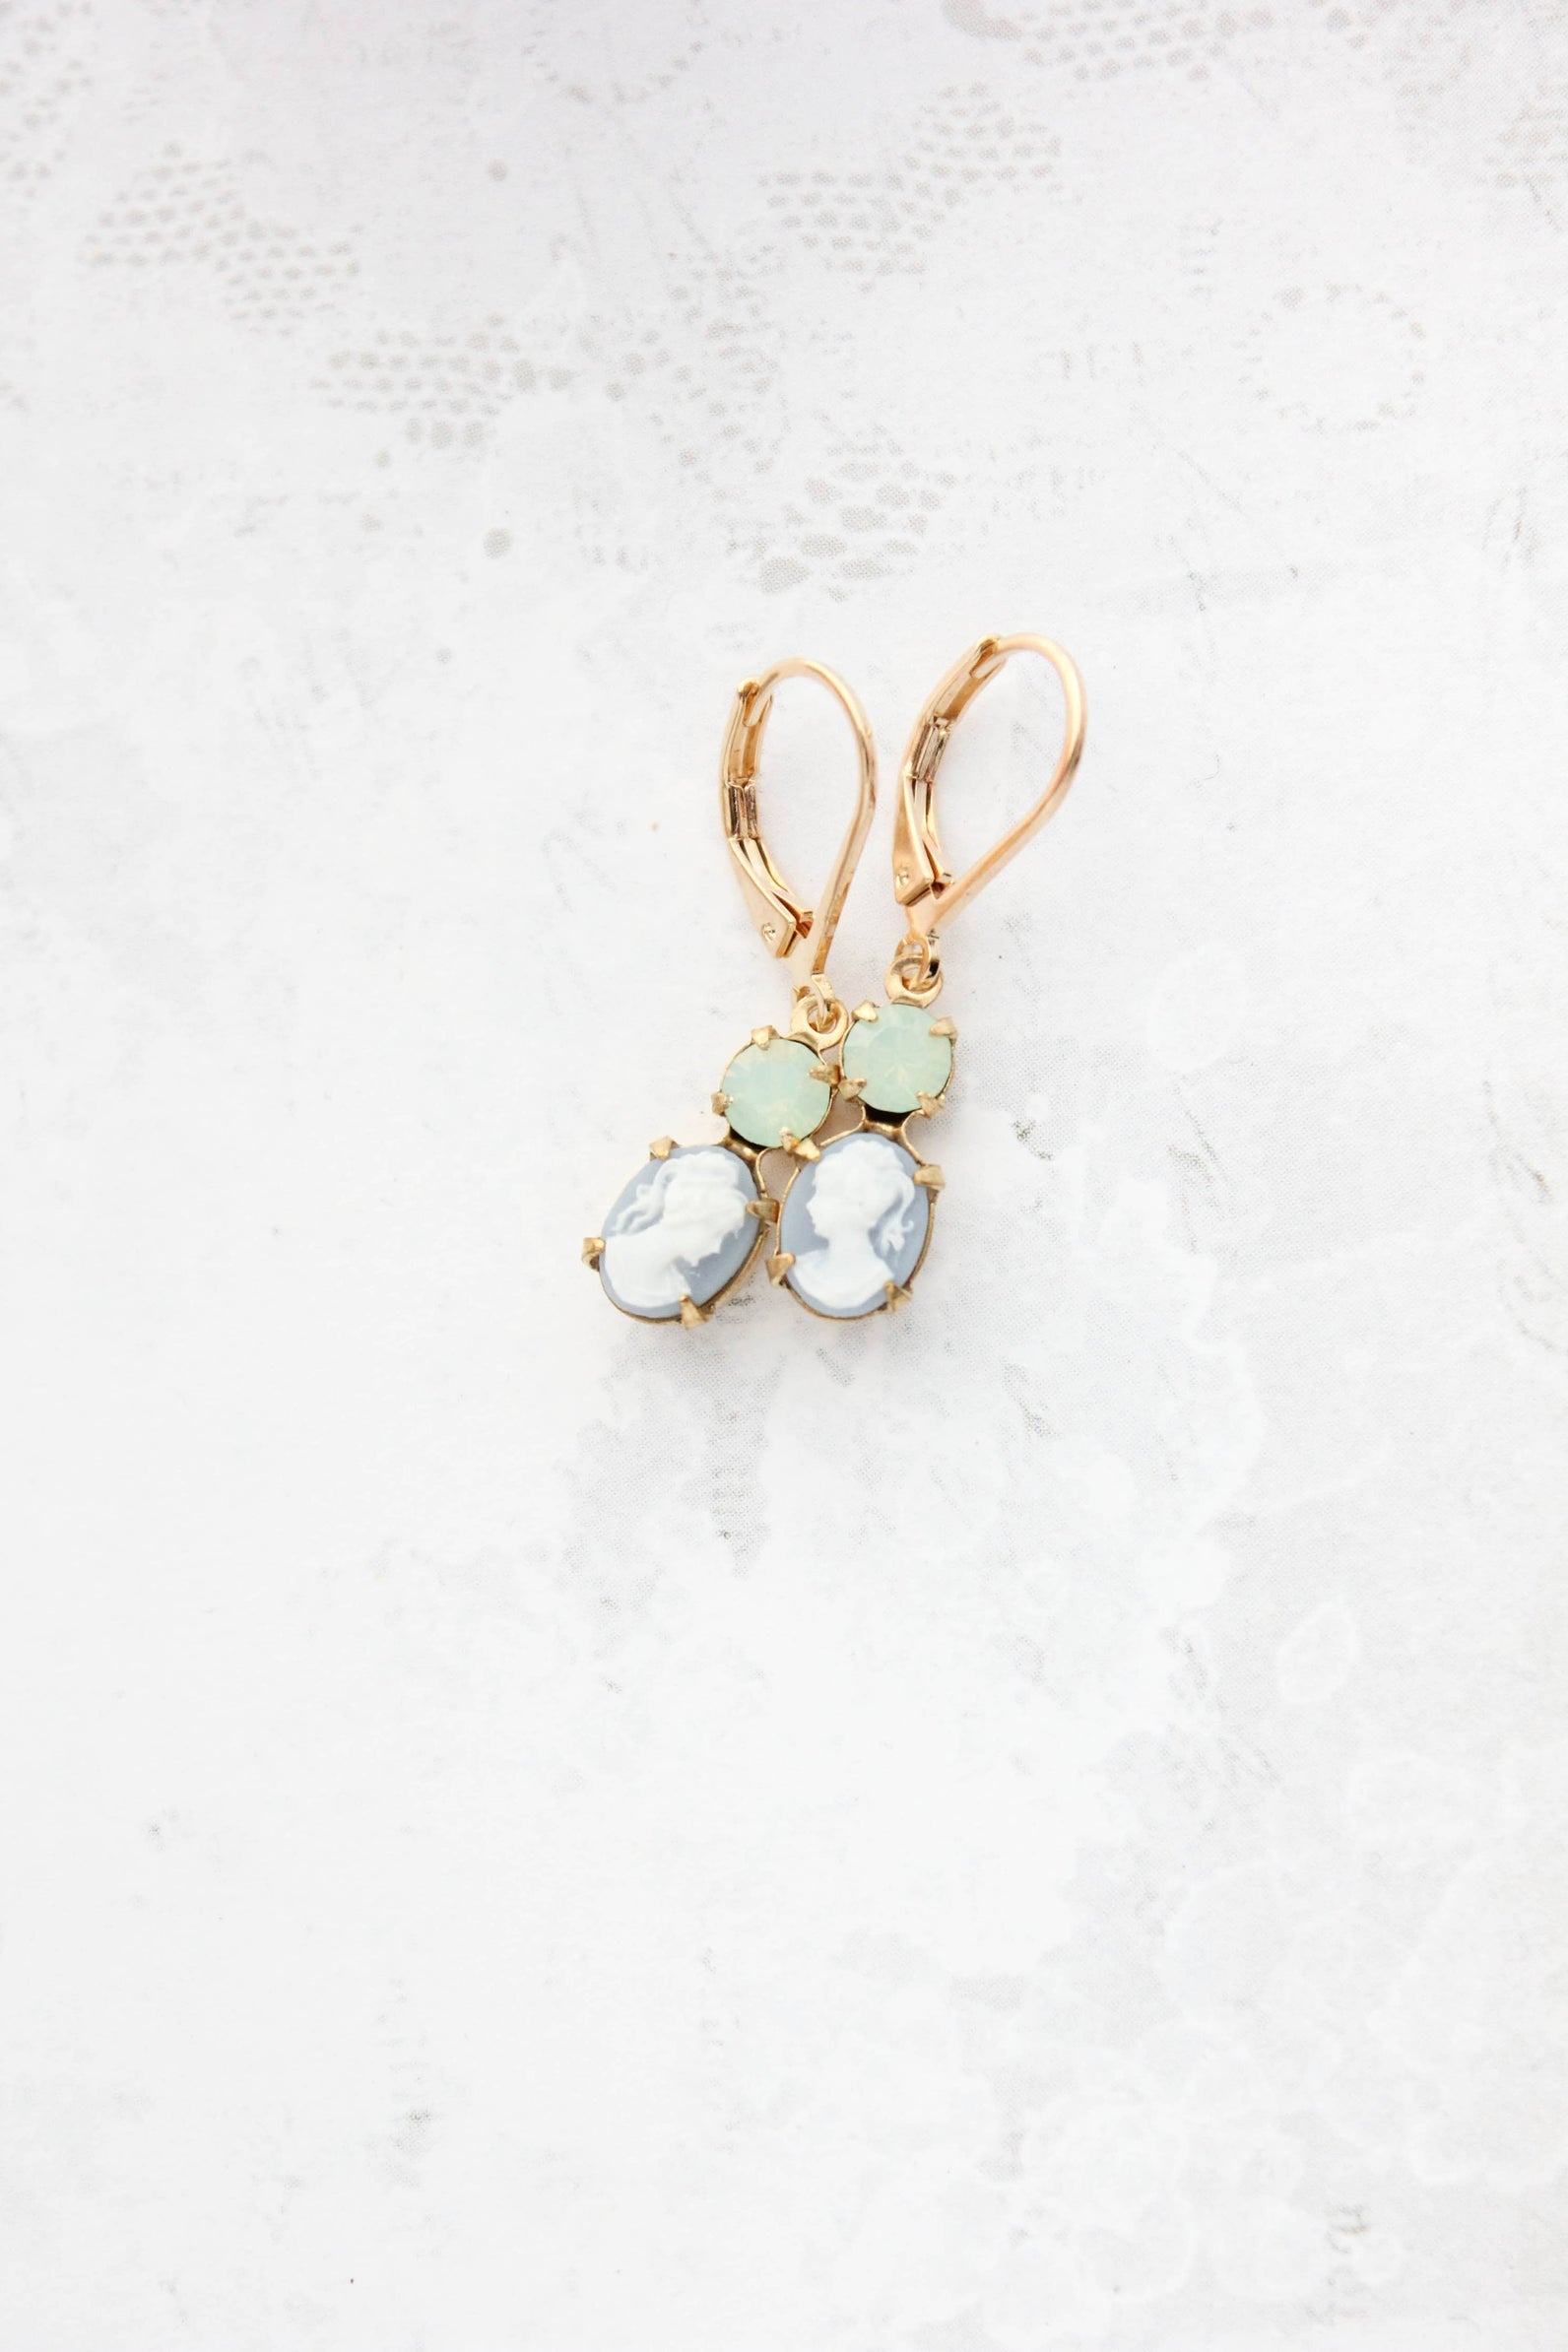 Lady Cameo Earrings - Out of the Blue